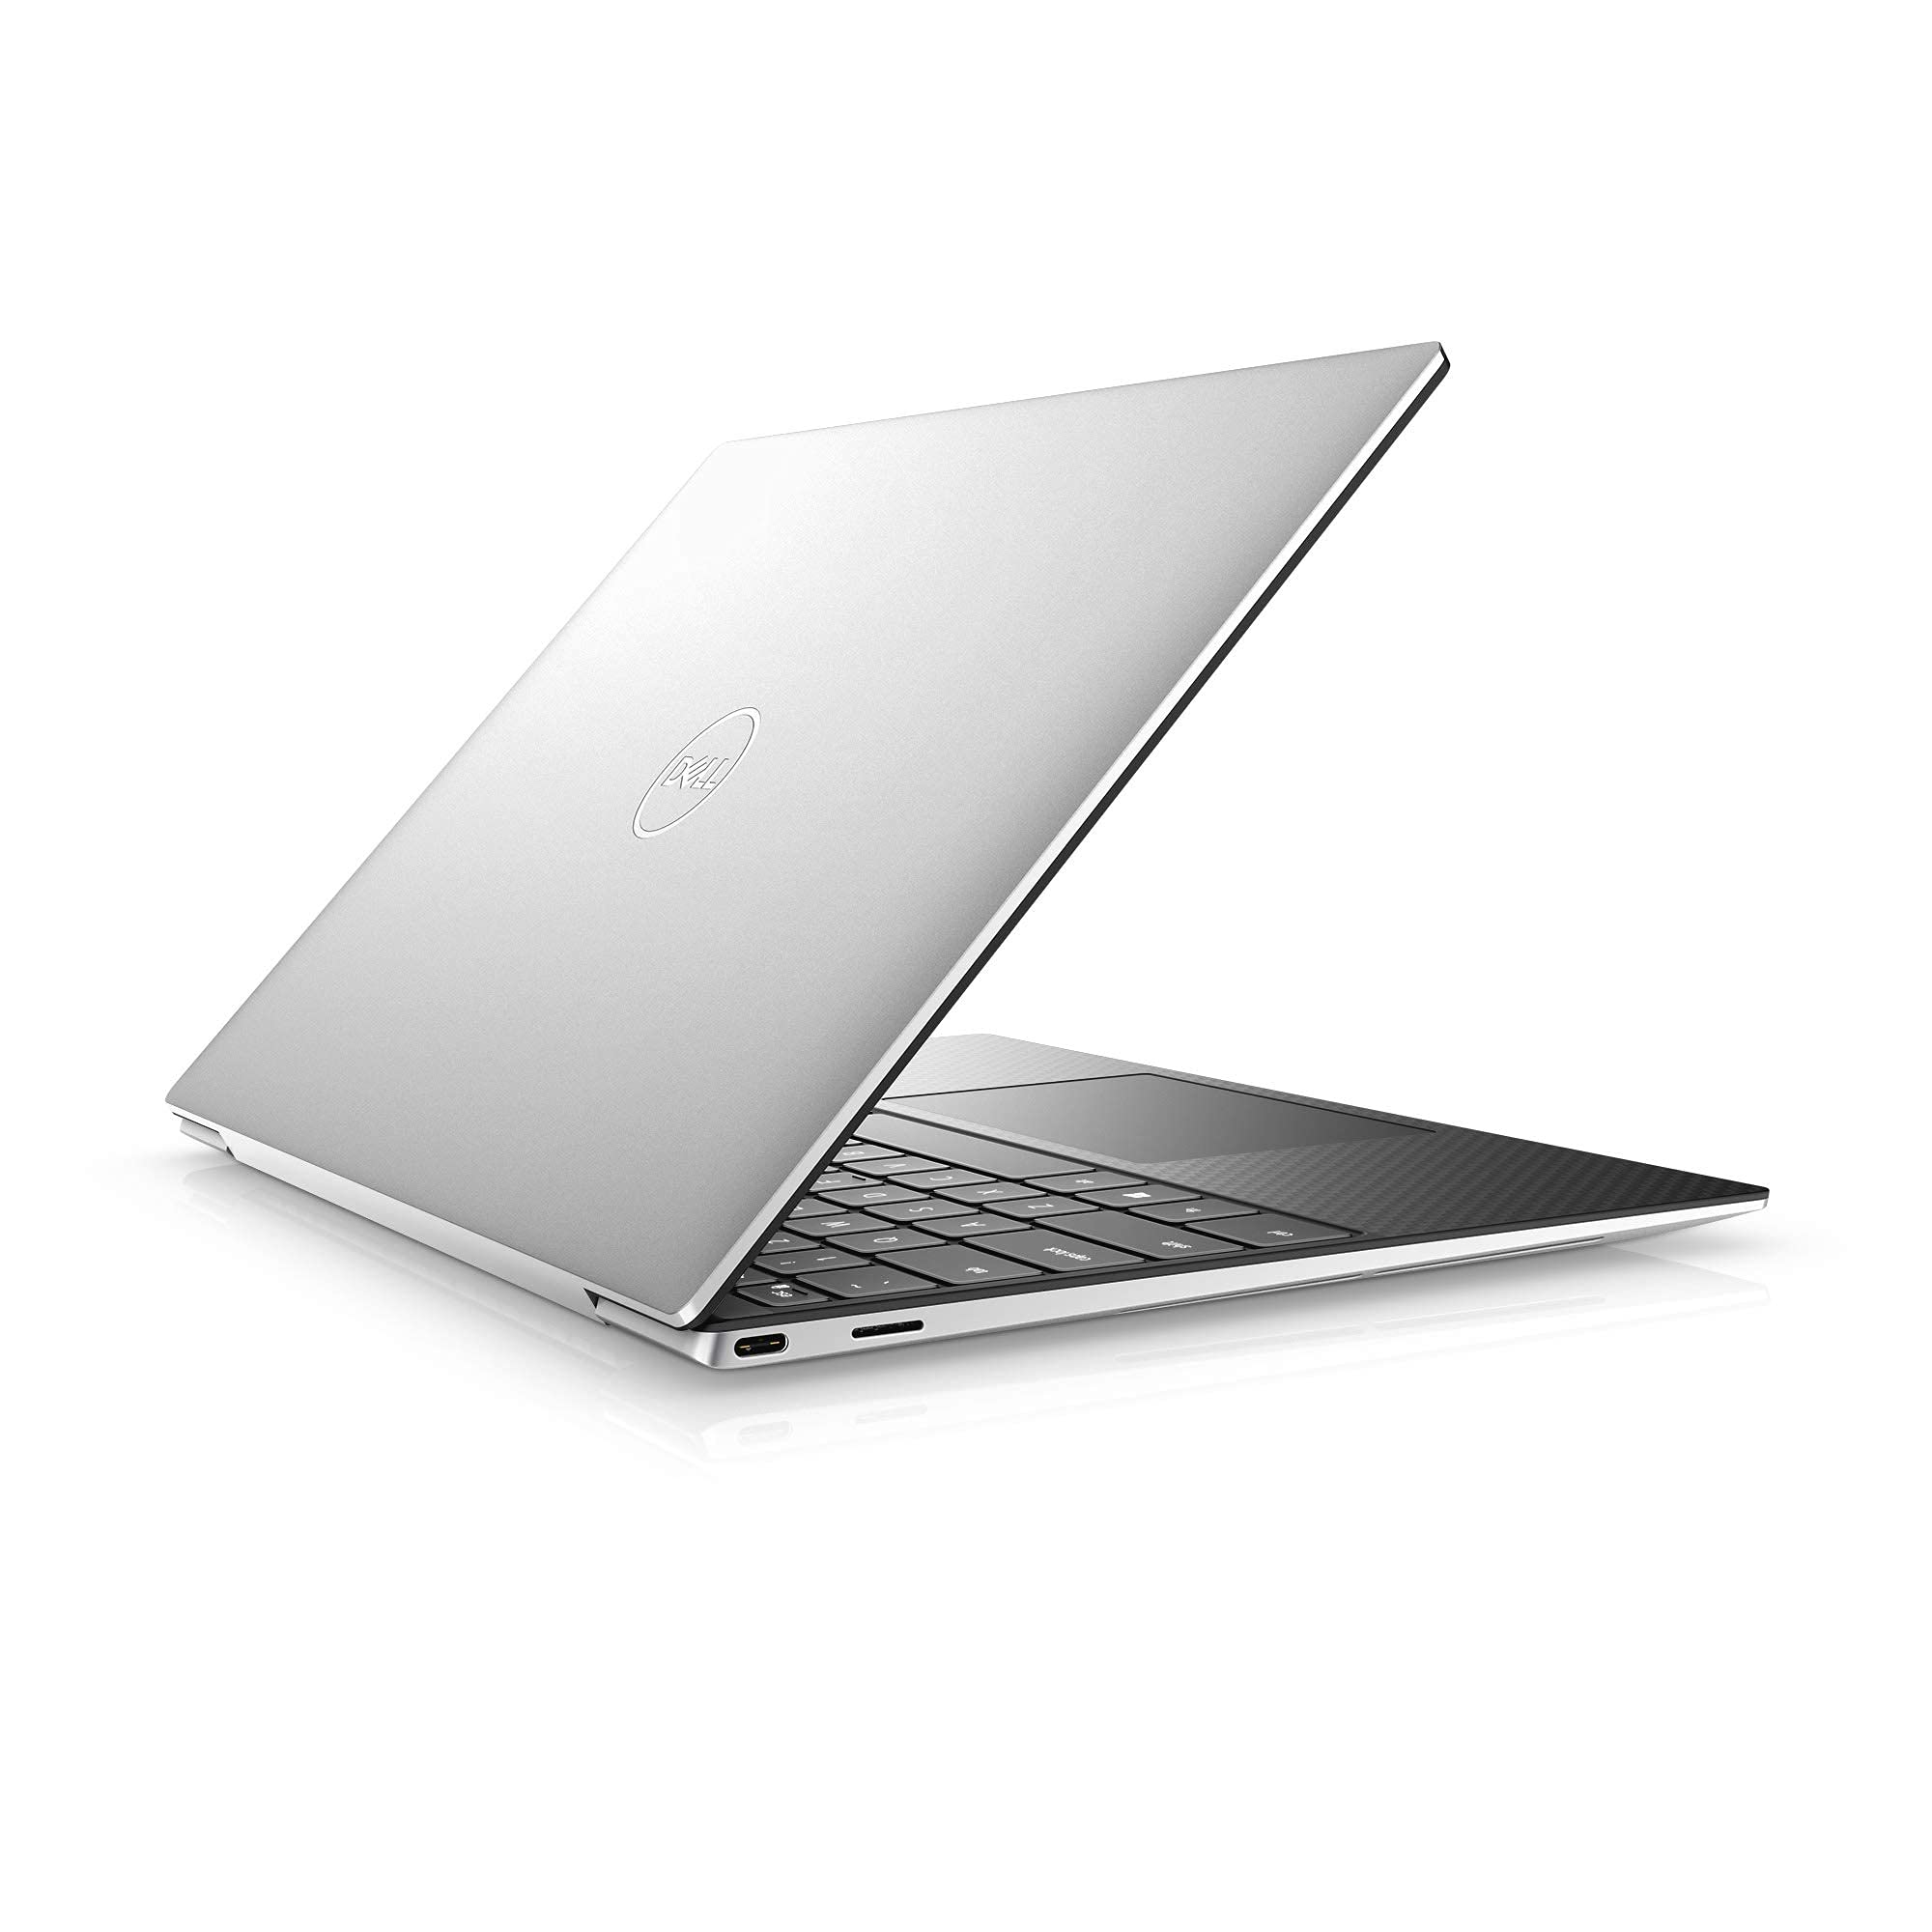 Dell XPS 13 9310 - 13.4 inch FHD Thin and Light Laptop - Intel Core i7 NON TOUCH (7975192002798)